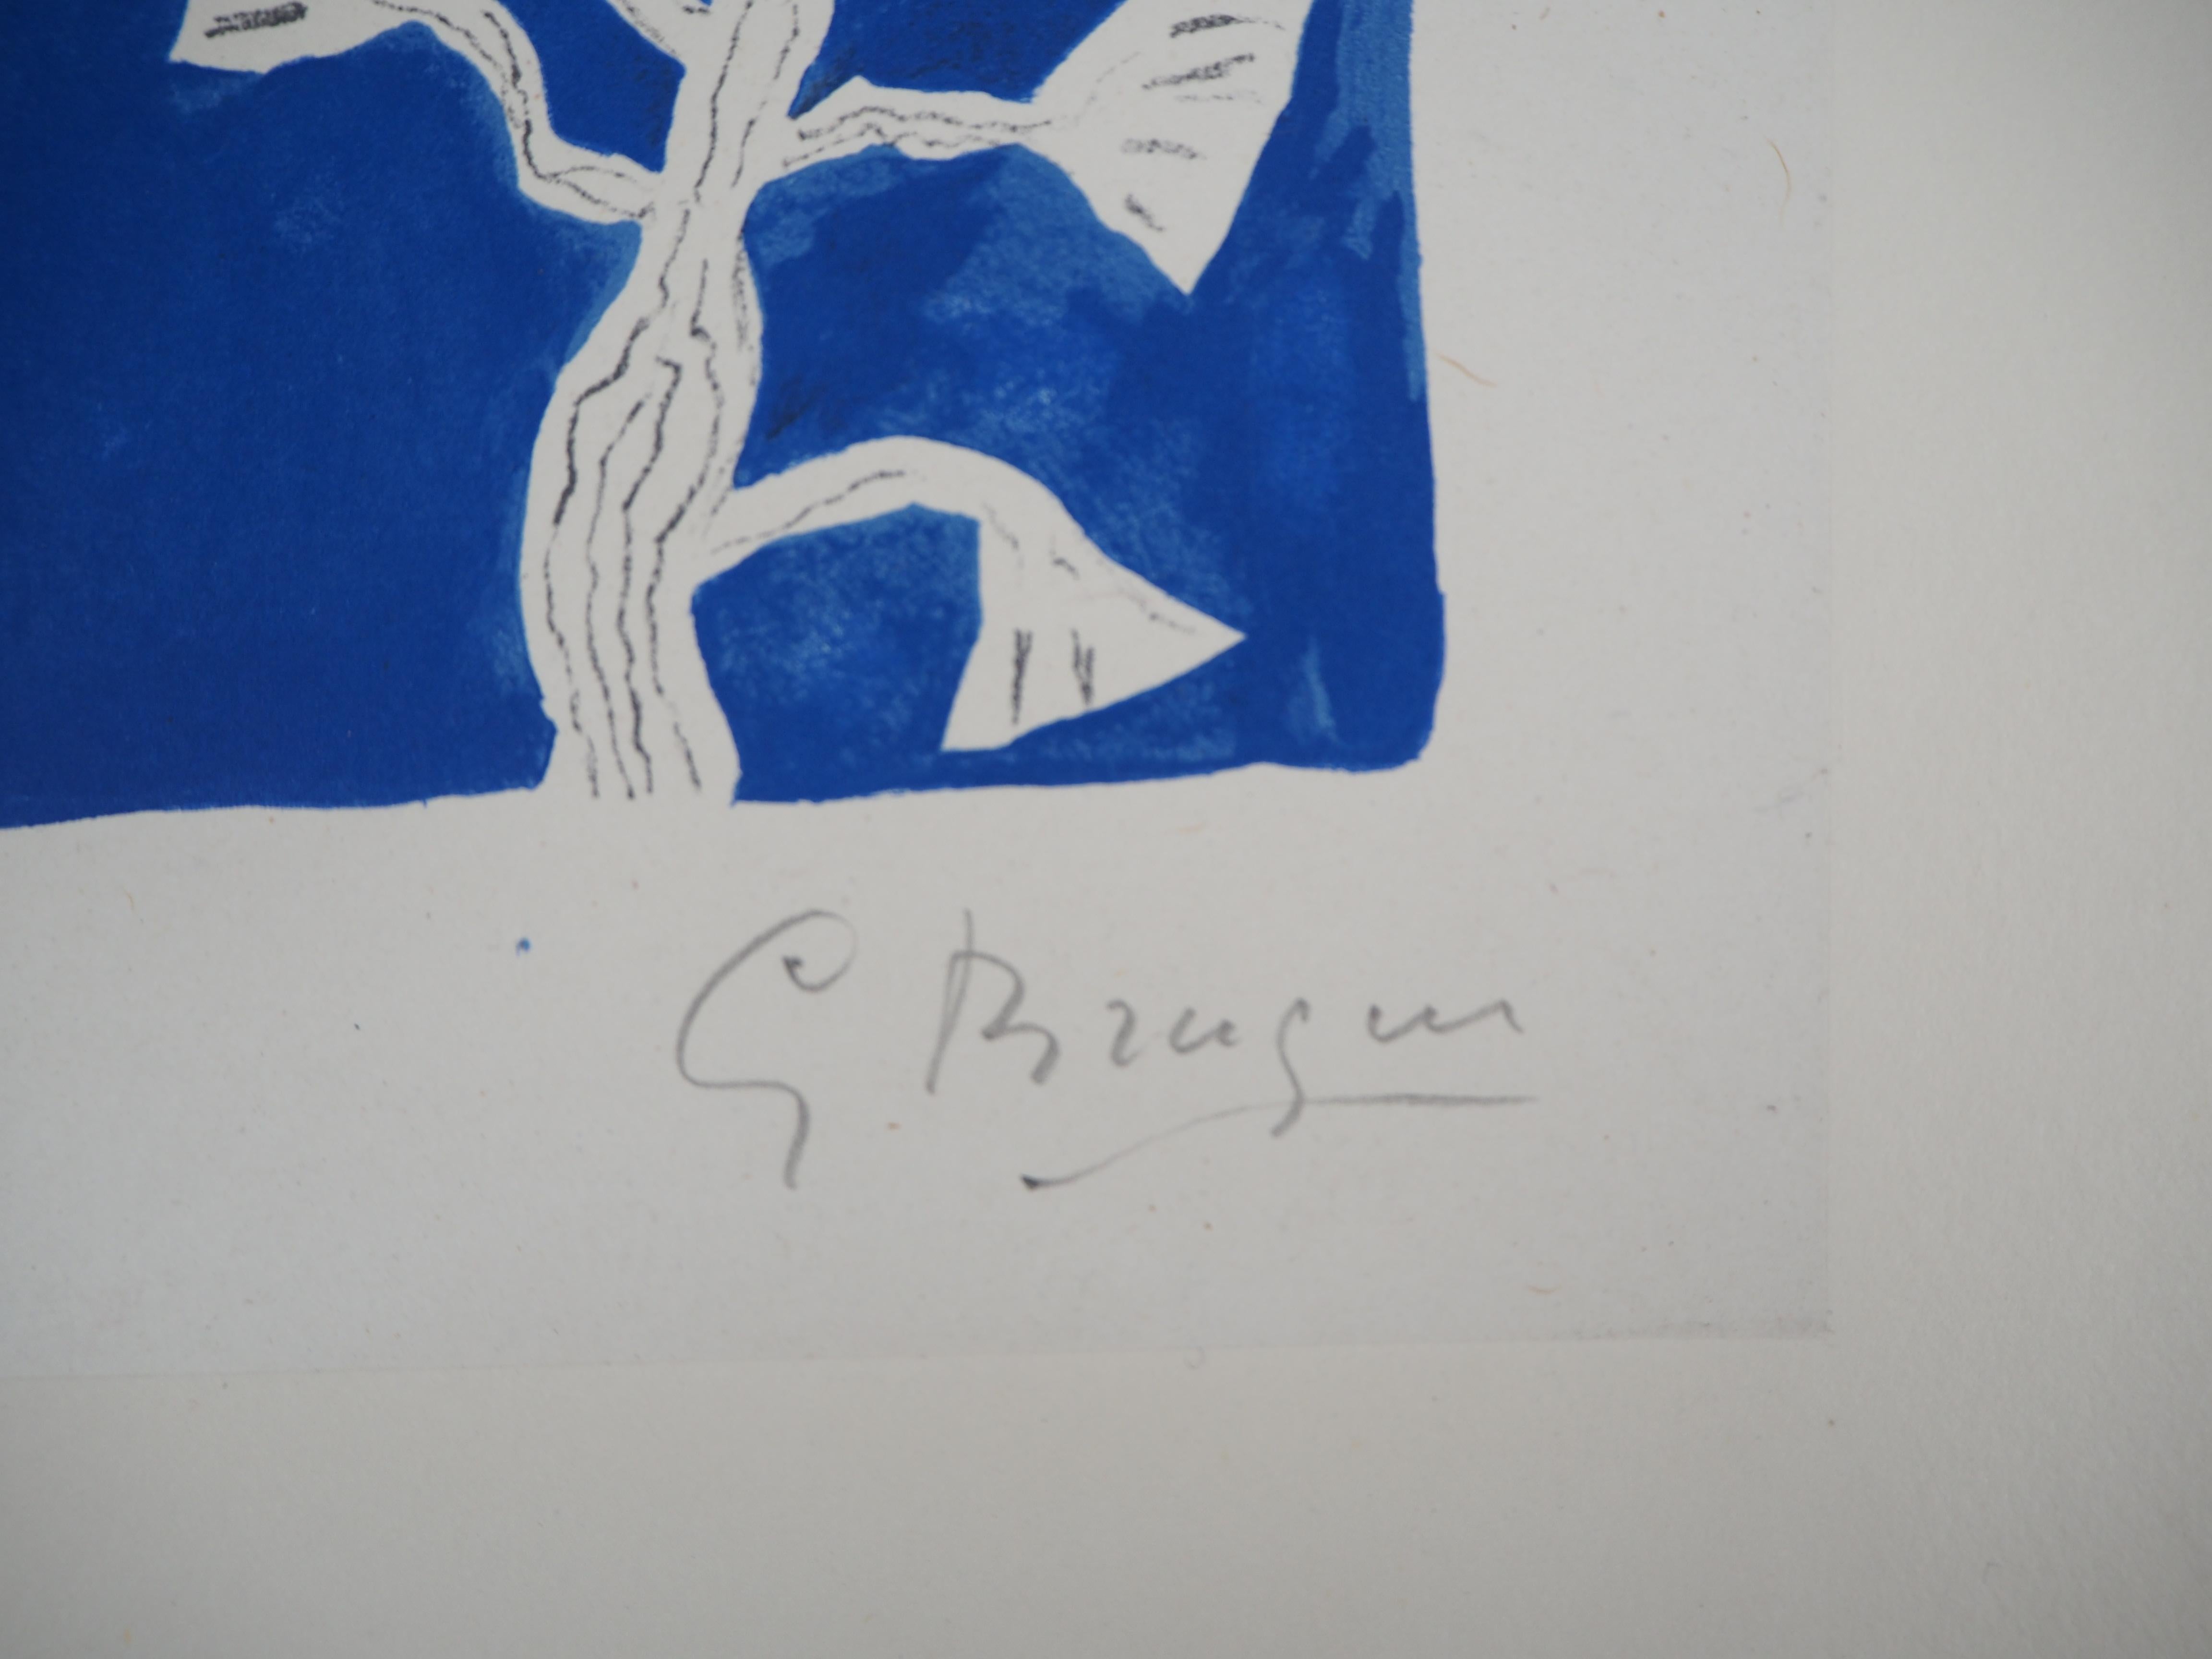 Bird and Lotus - Original lithograph, Handsigned, Ltd / 10 - Mourlot #92) - Cubist Print by Georges Braque